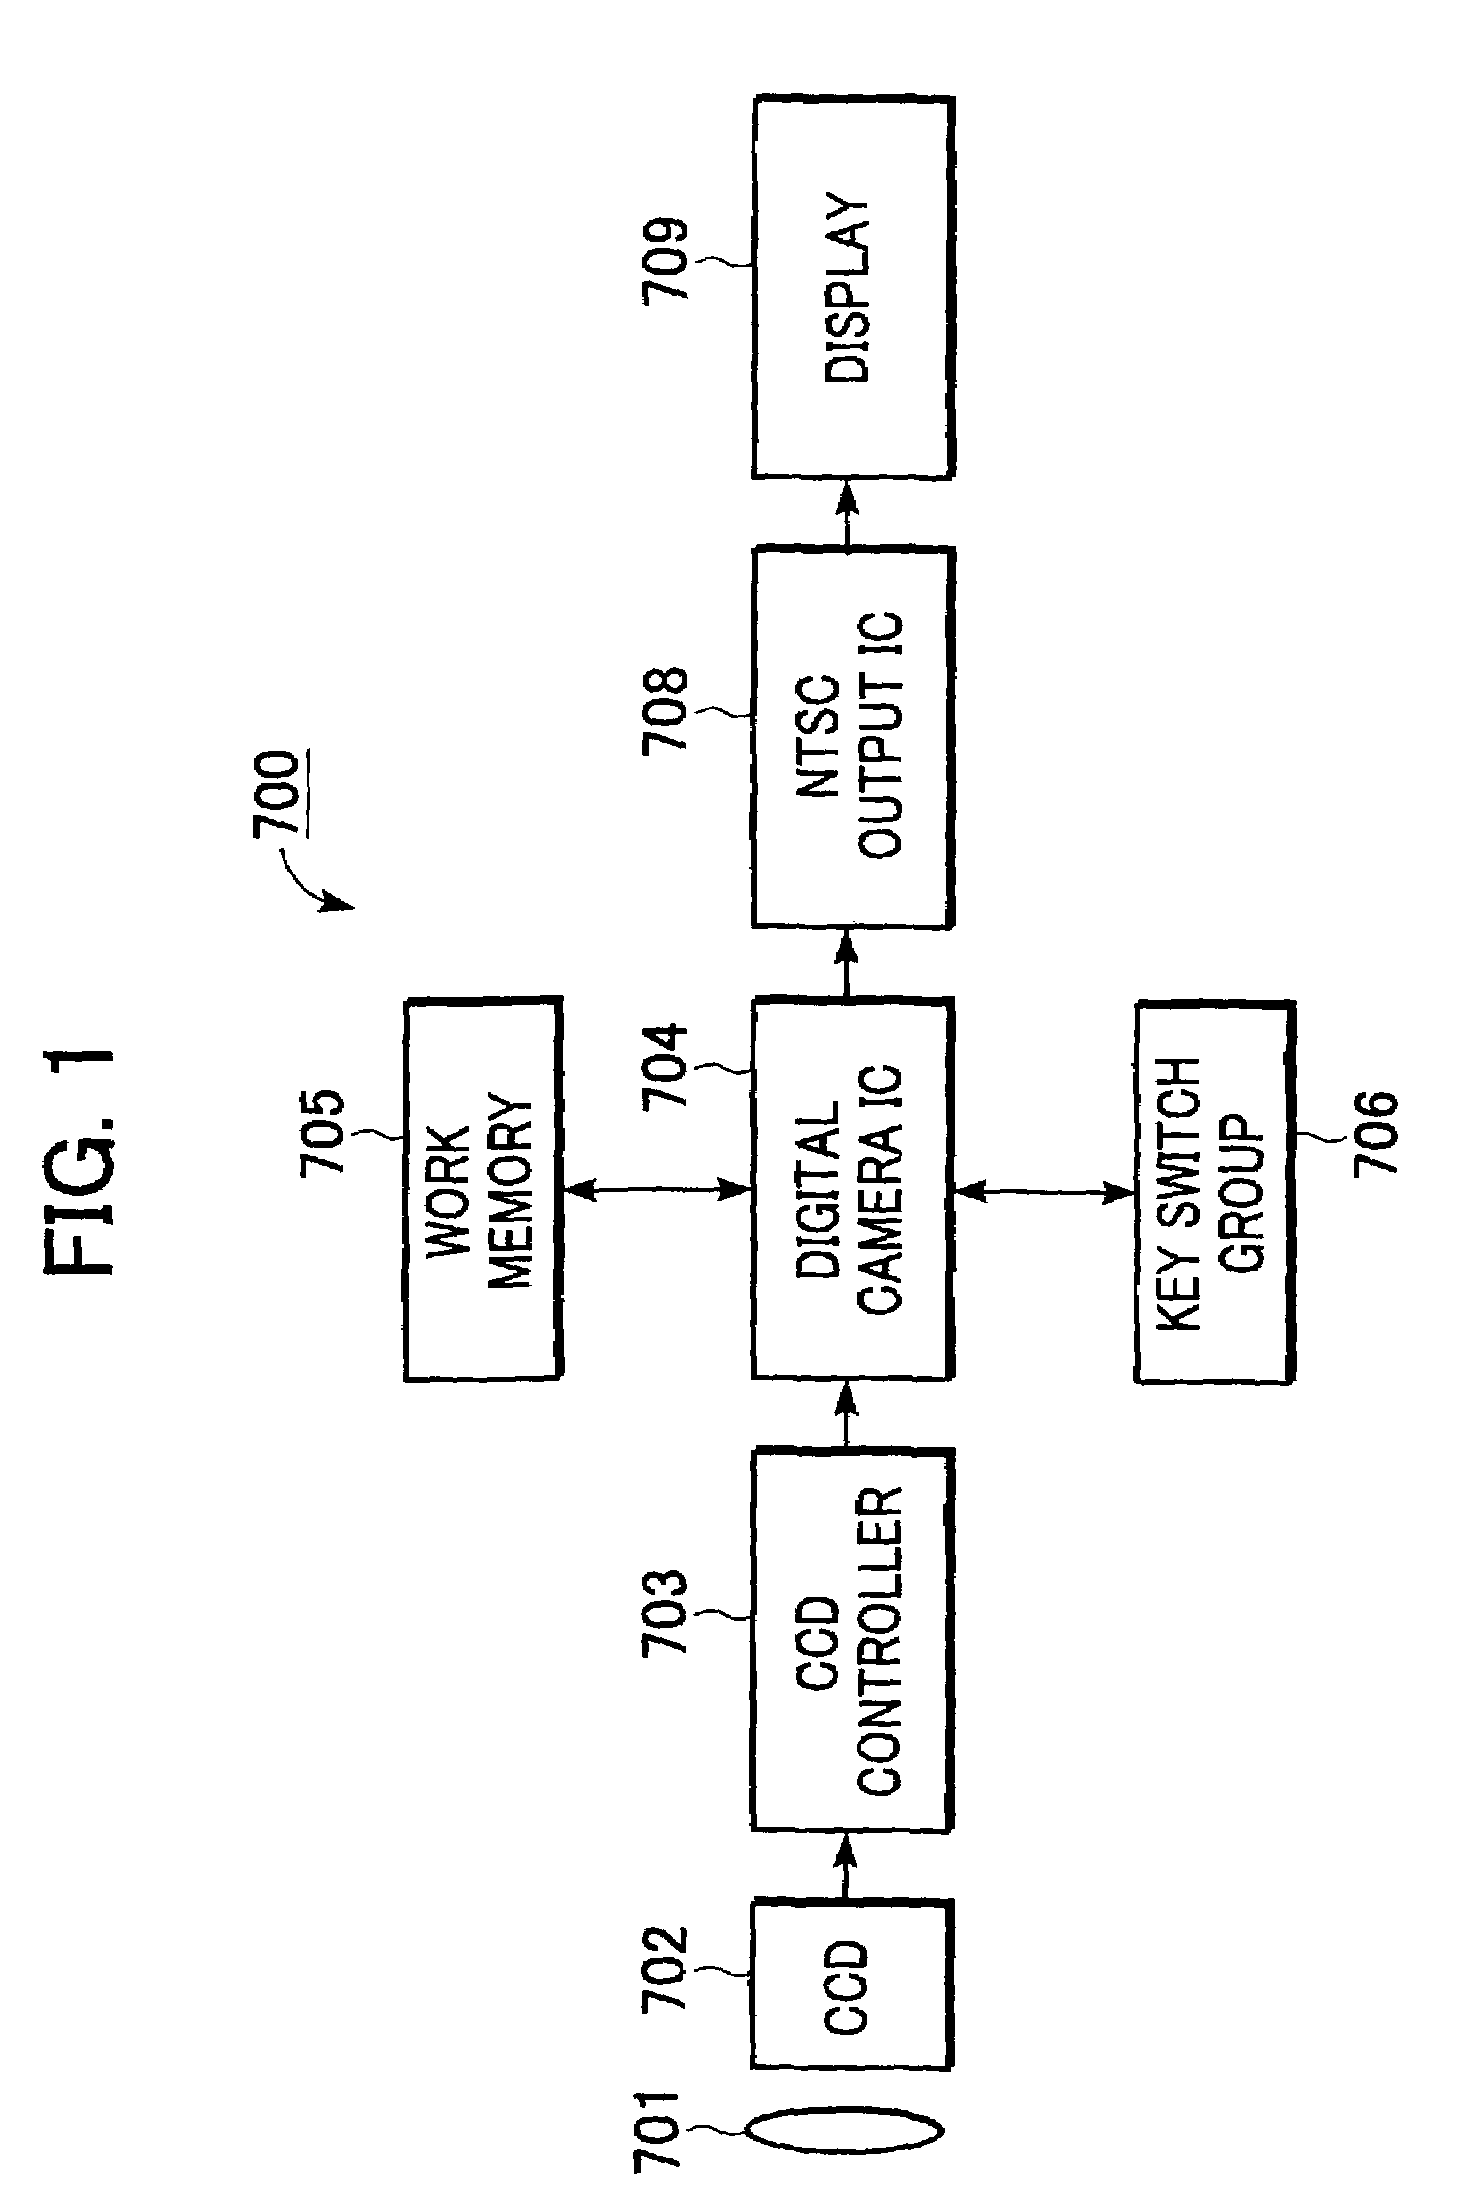 Image processing apparatus and method for efficiently compressing and encoding still images and motion pictures